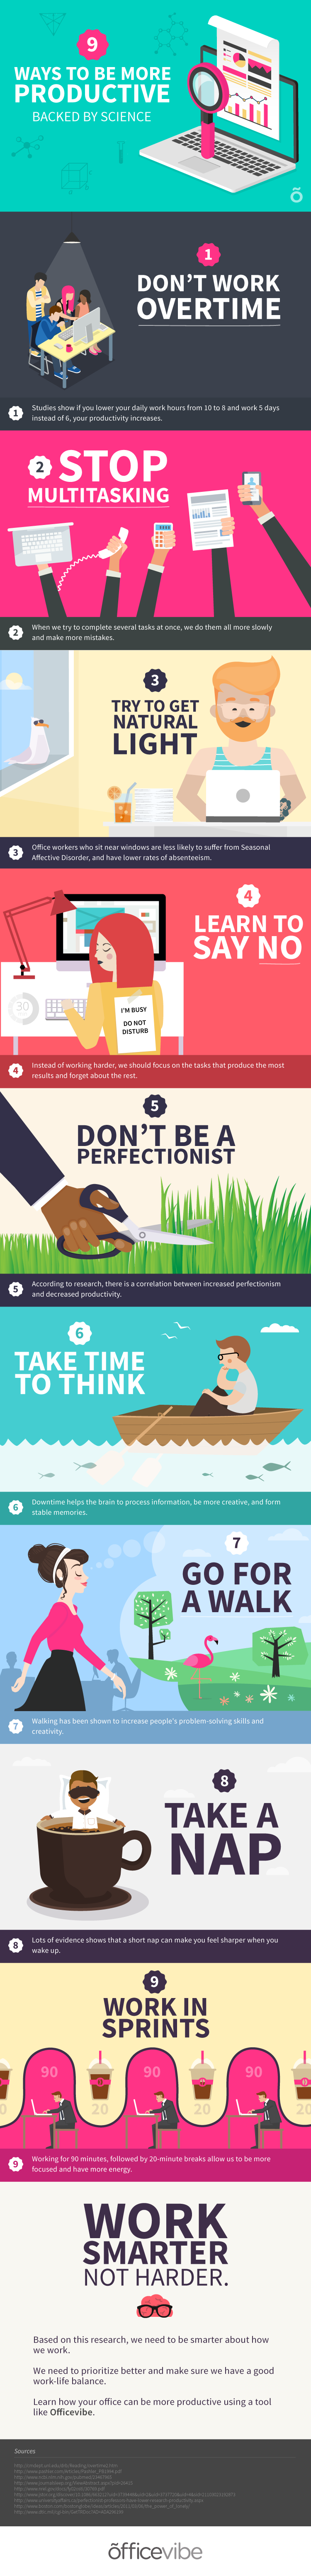 9 Ways To Be More Productive (Infographic)